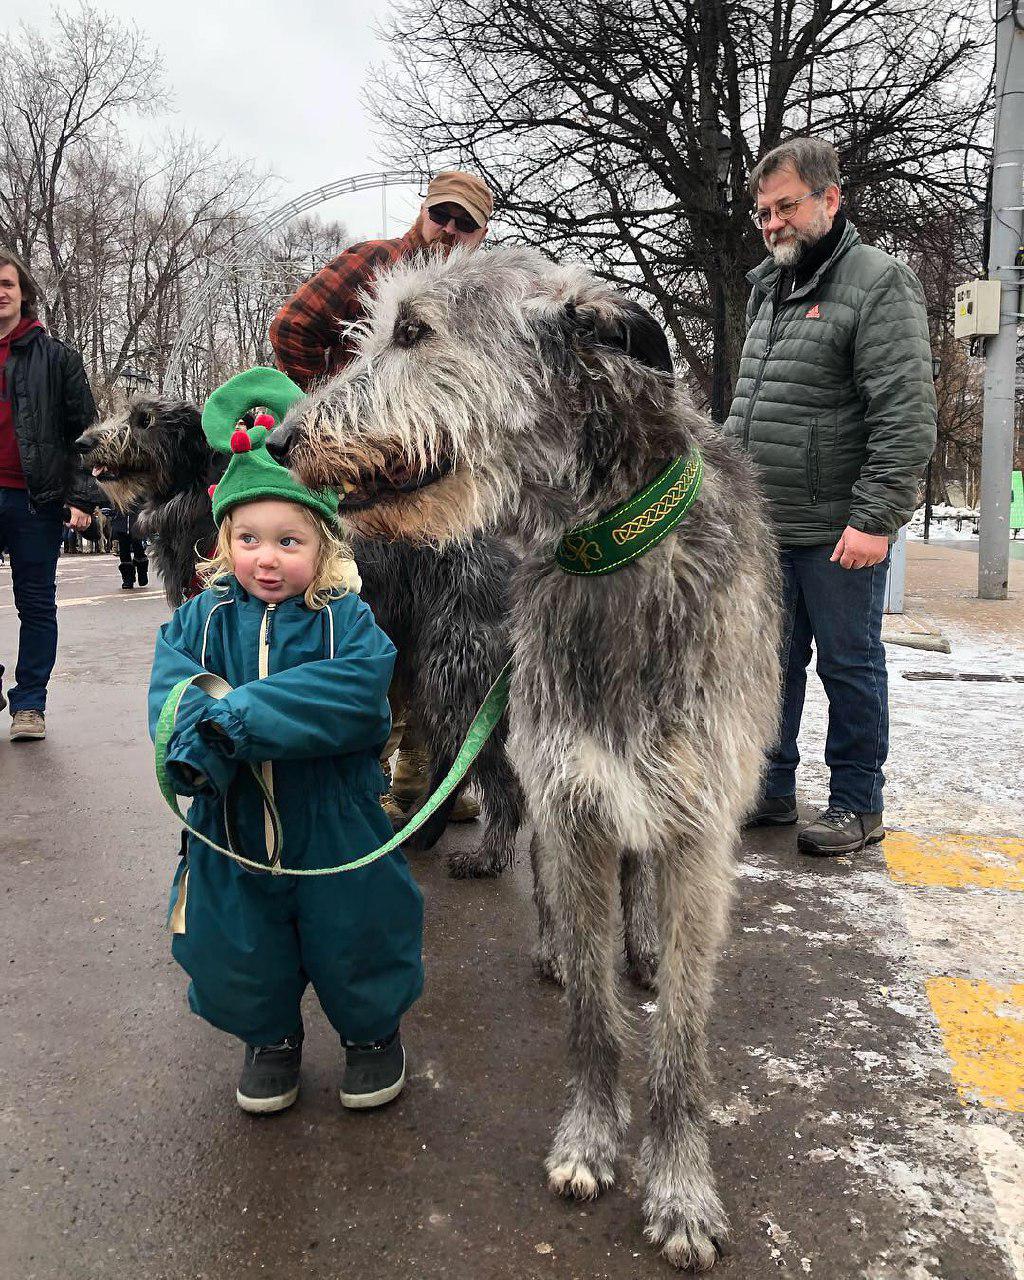 Irish Wolfhound dog with a kid outside the streets